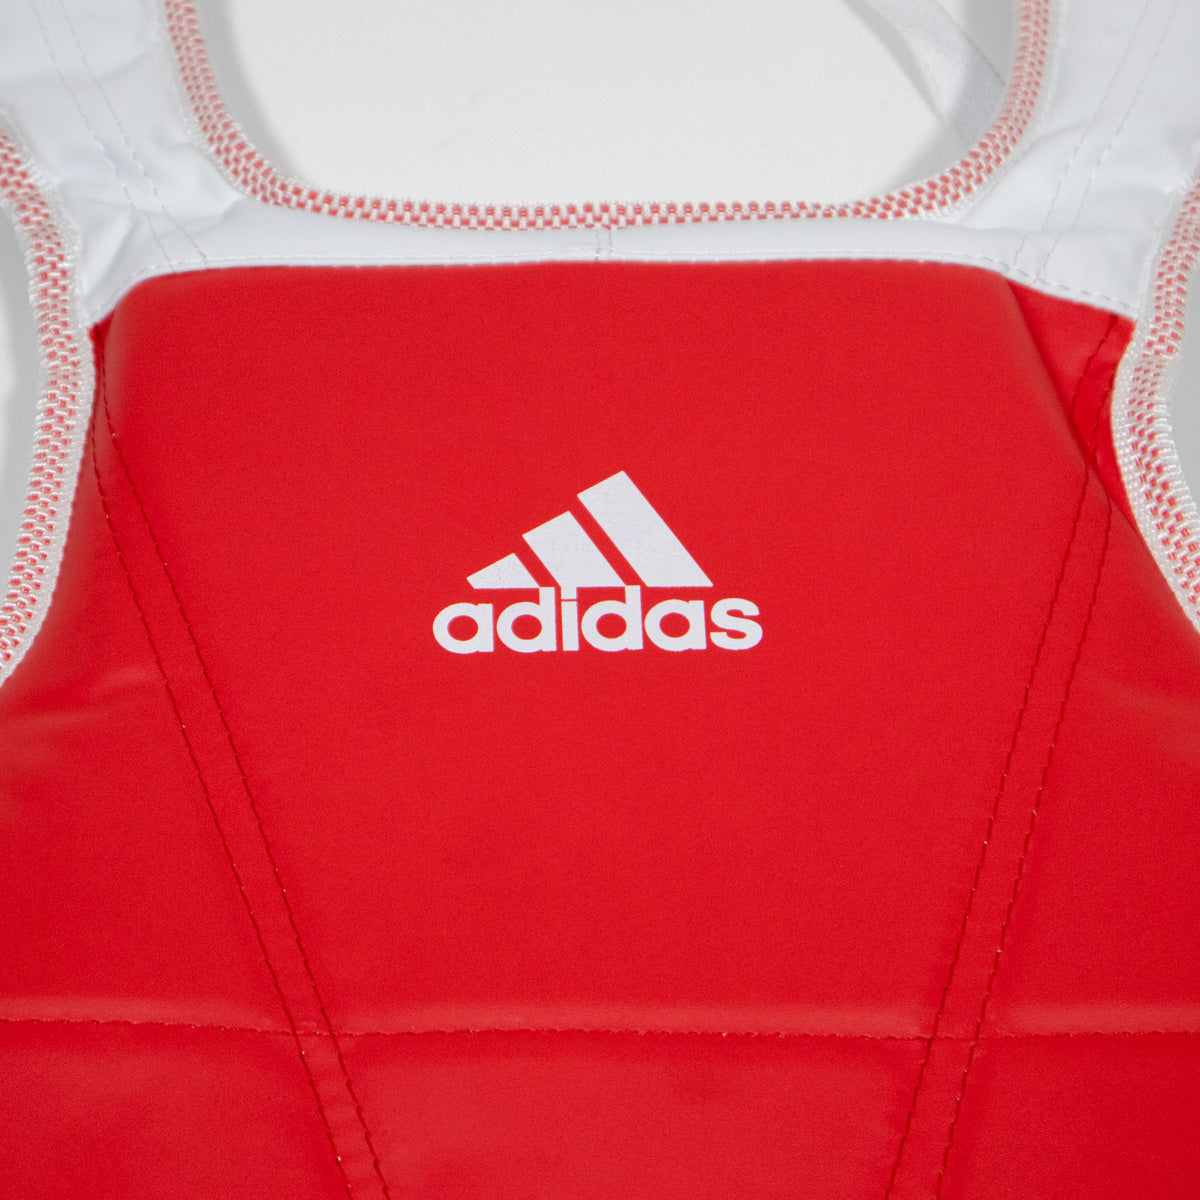 Body protector reversible Adult Adidas WTF